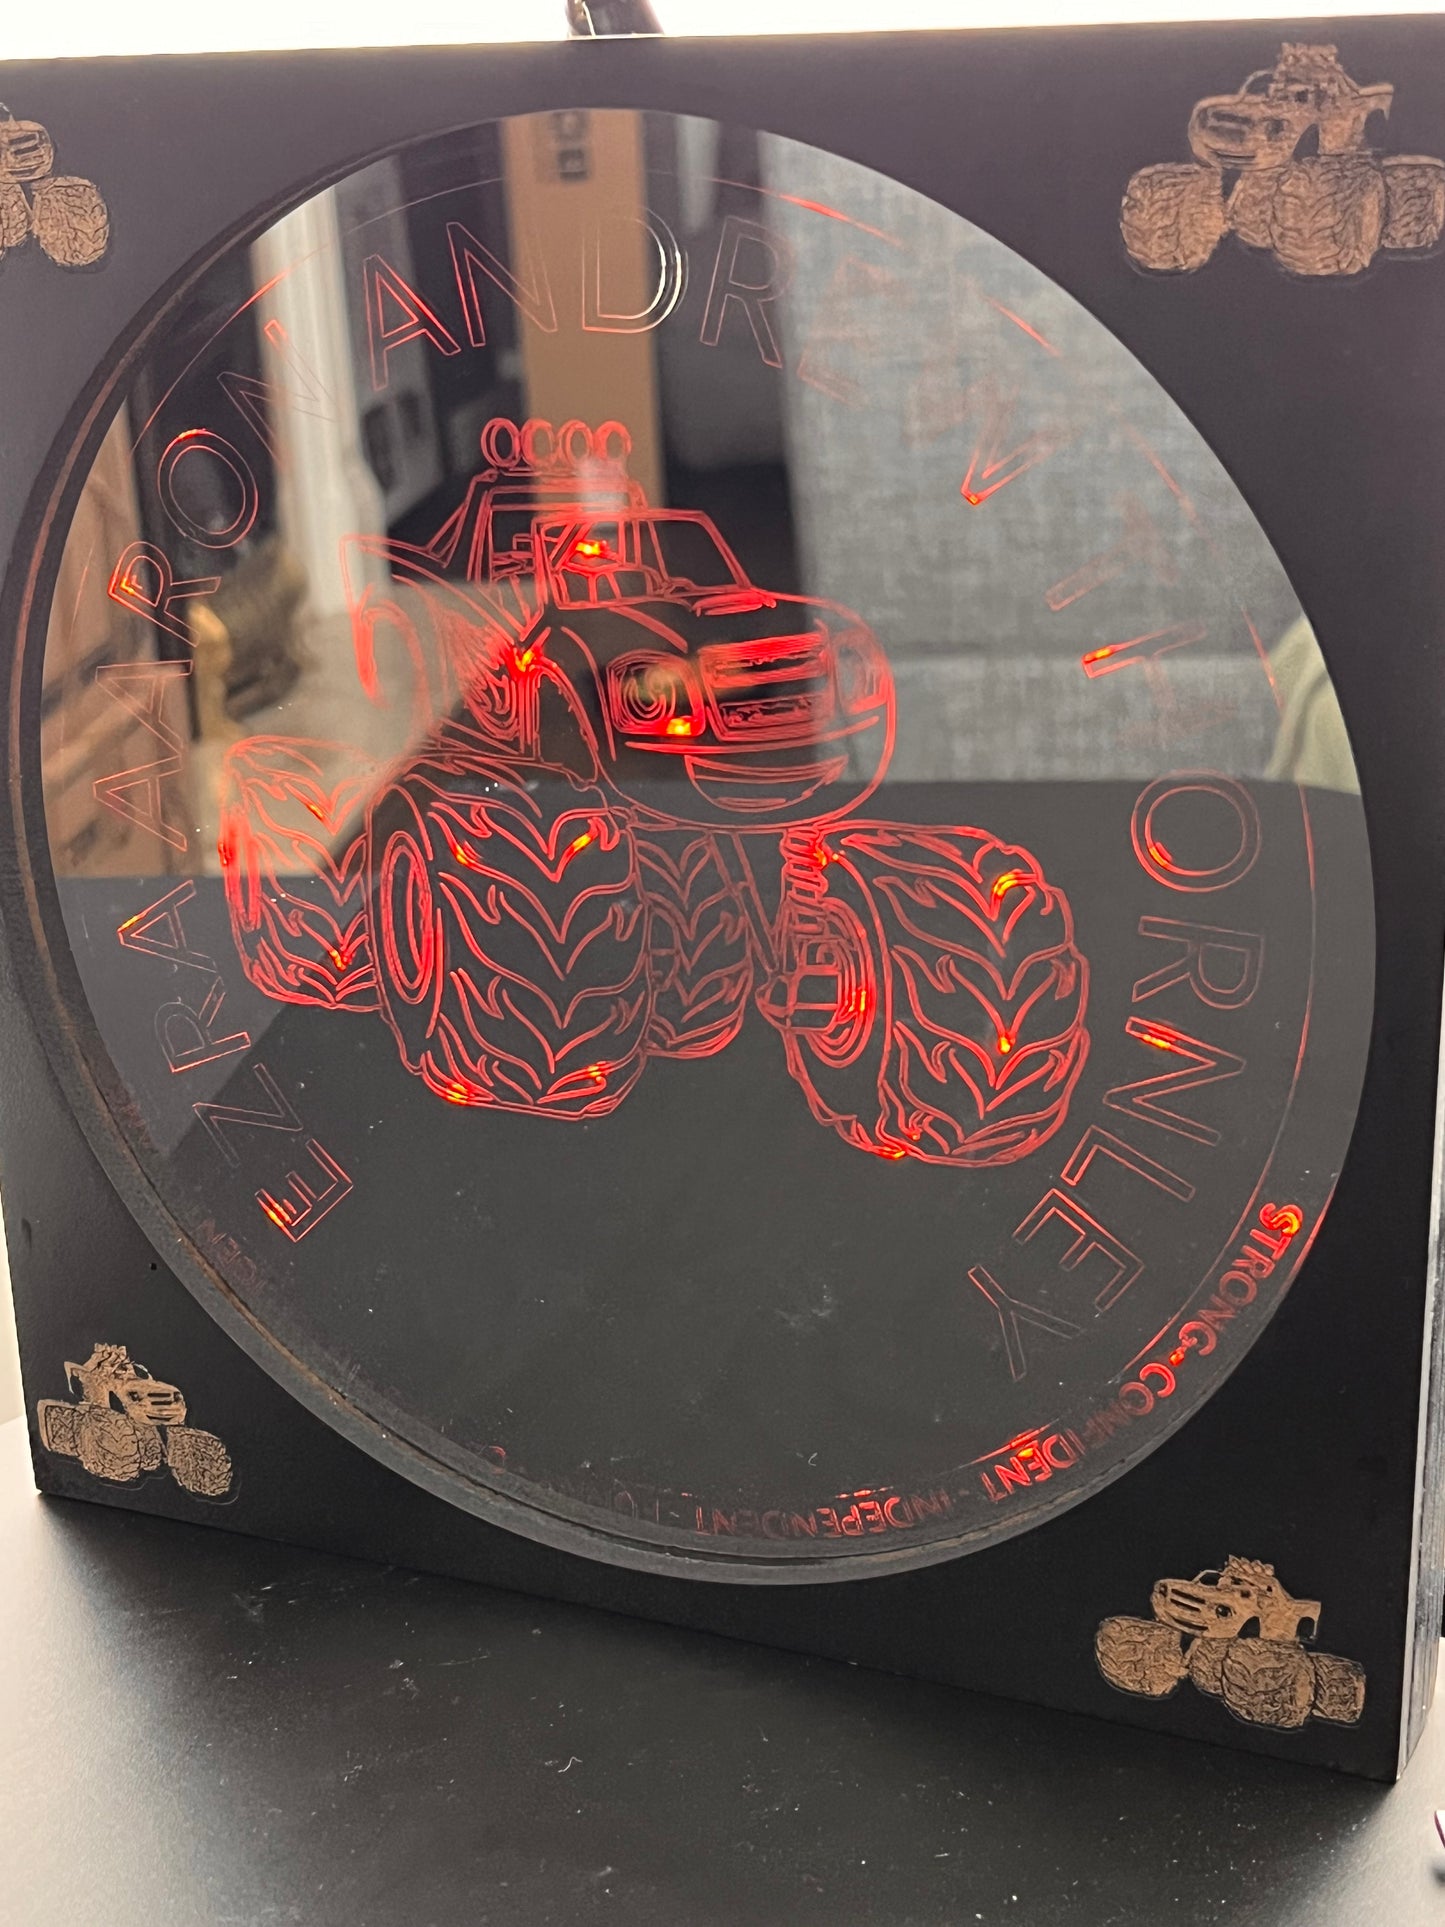 LED engraved mirror in case